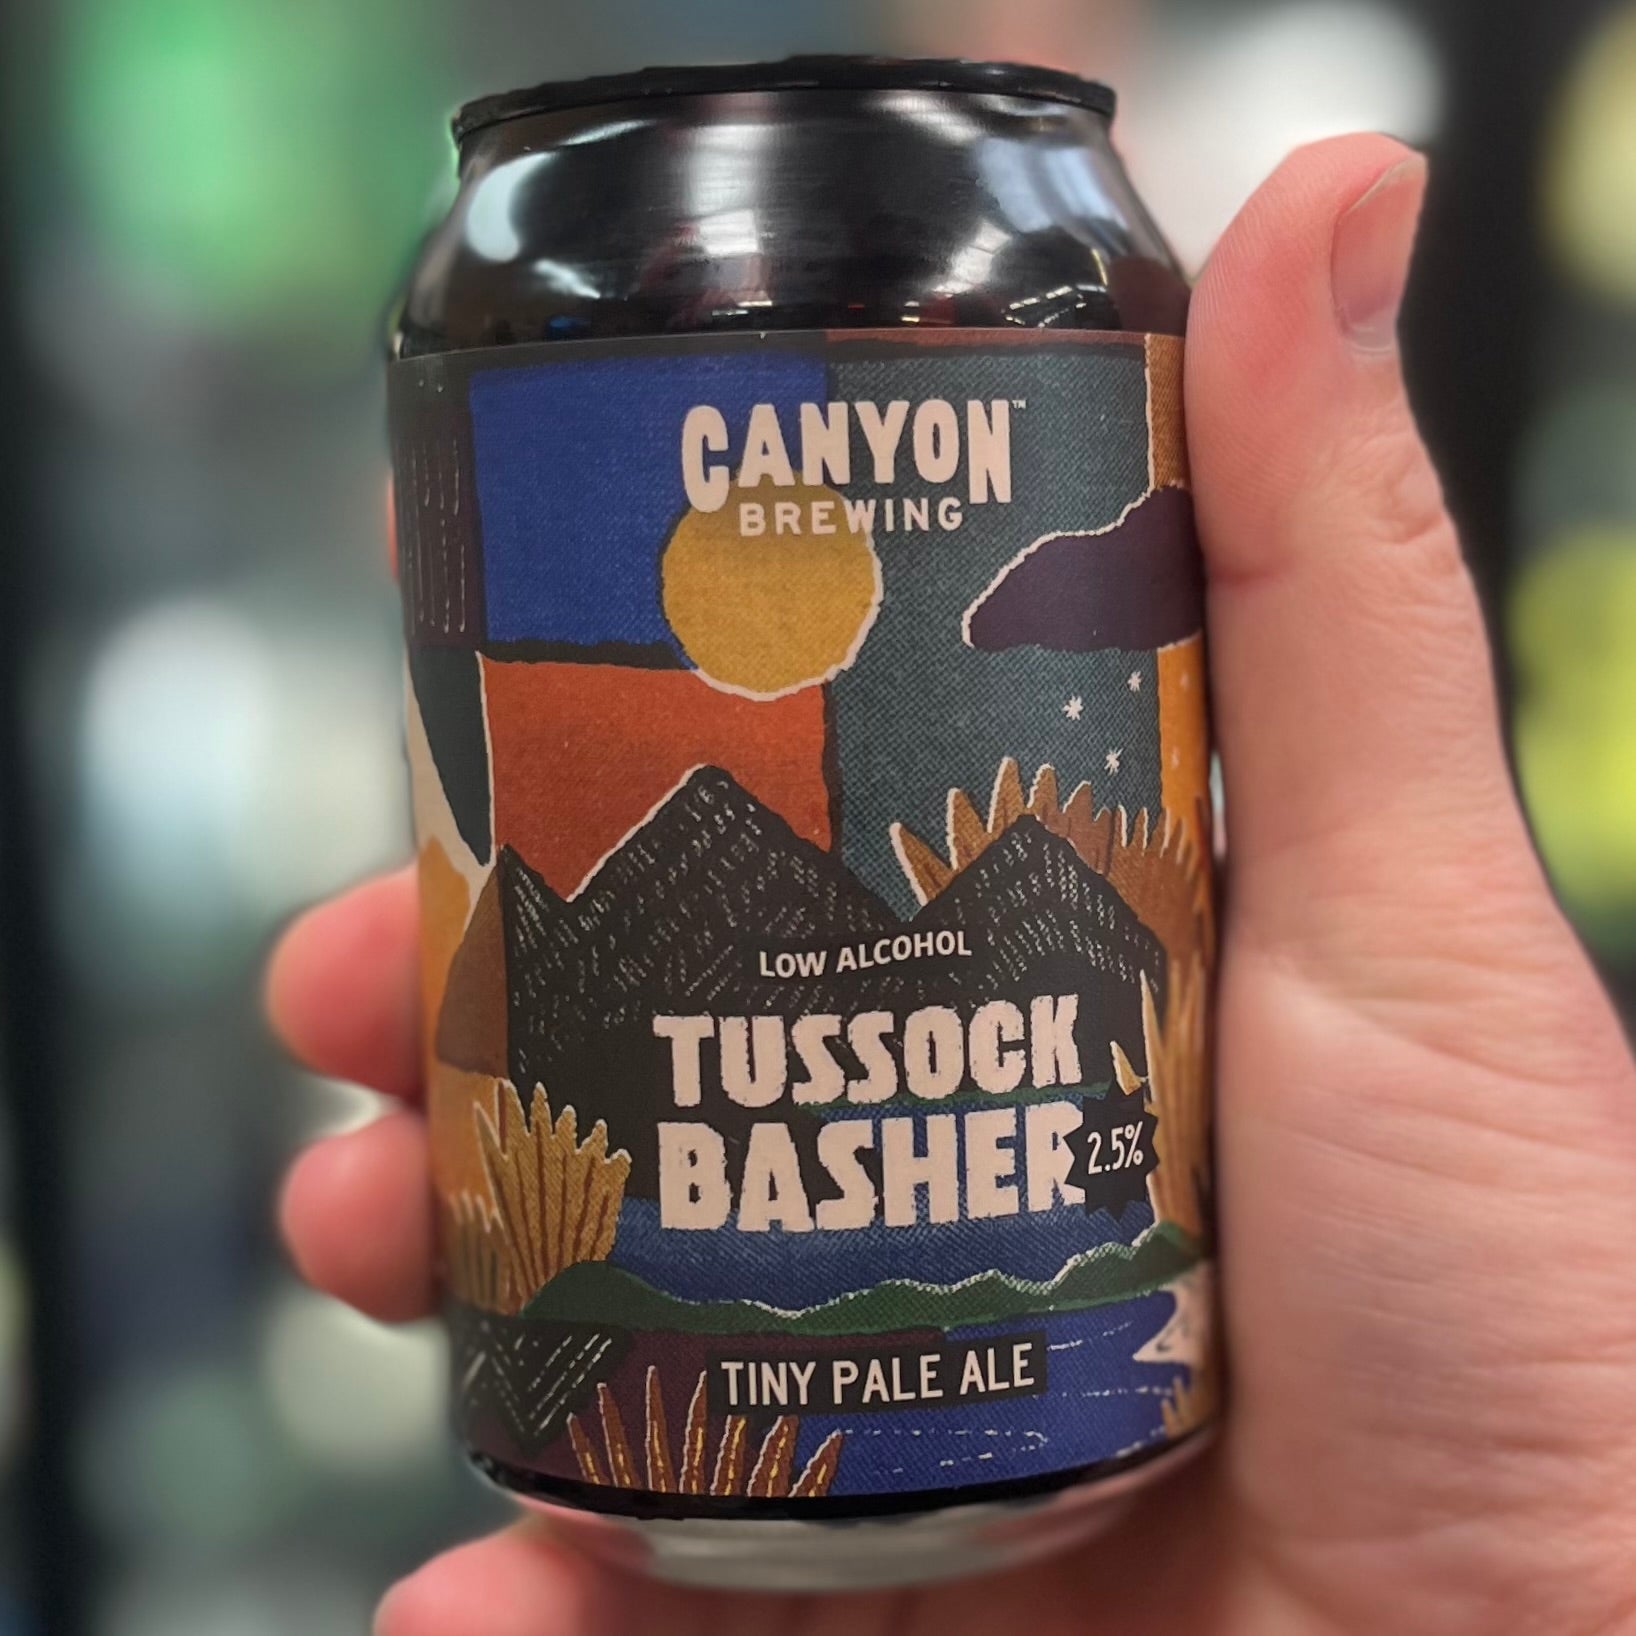 Tussock Basher Tiny Pale Ale